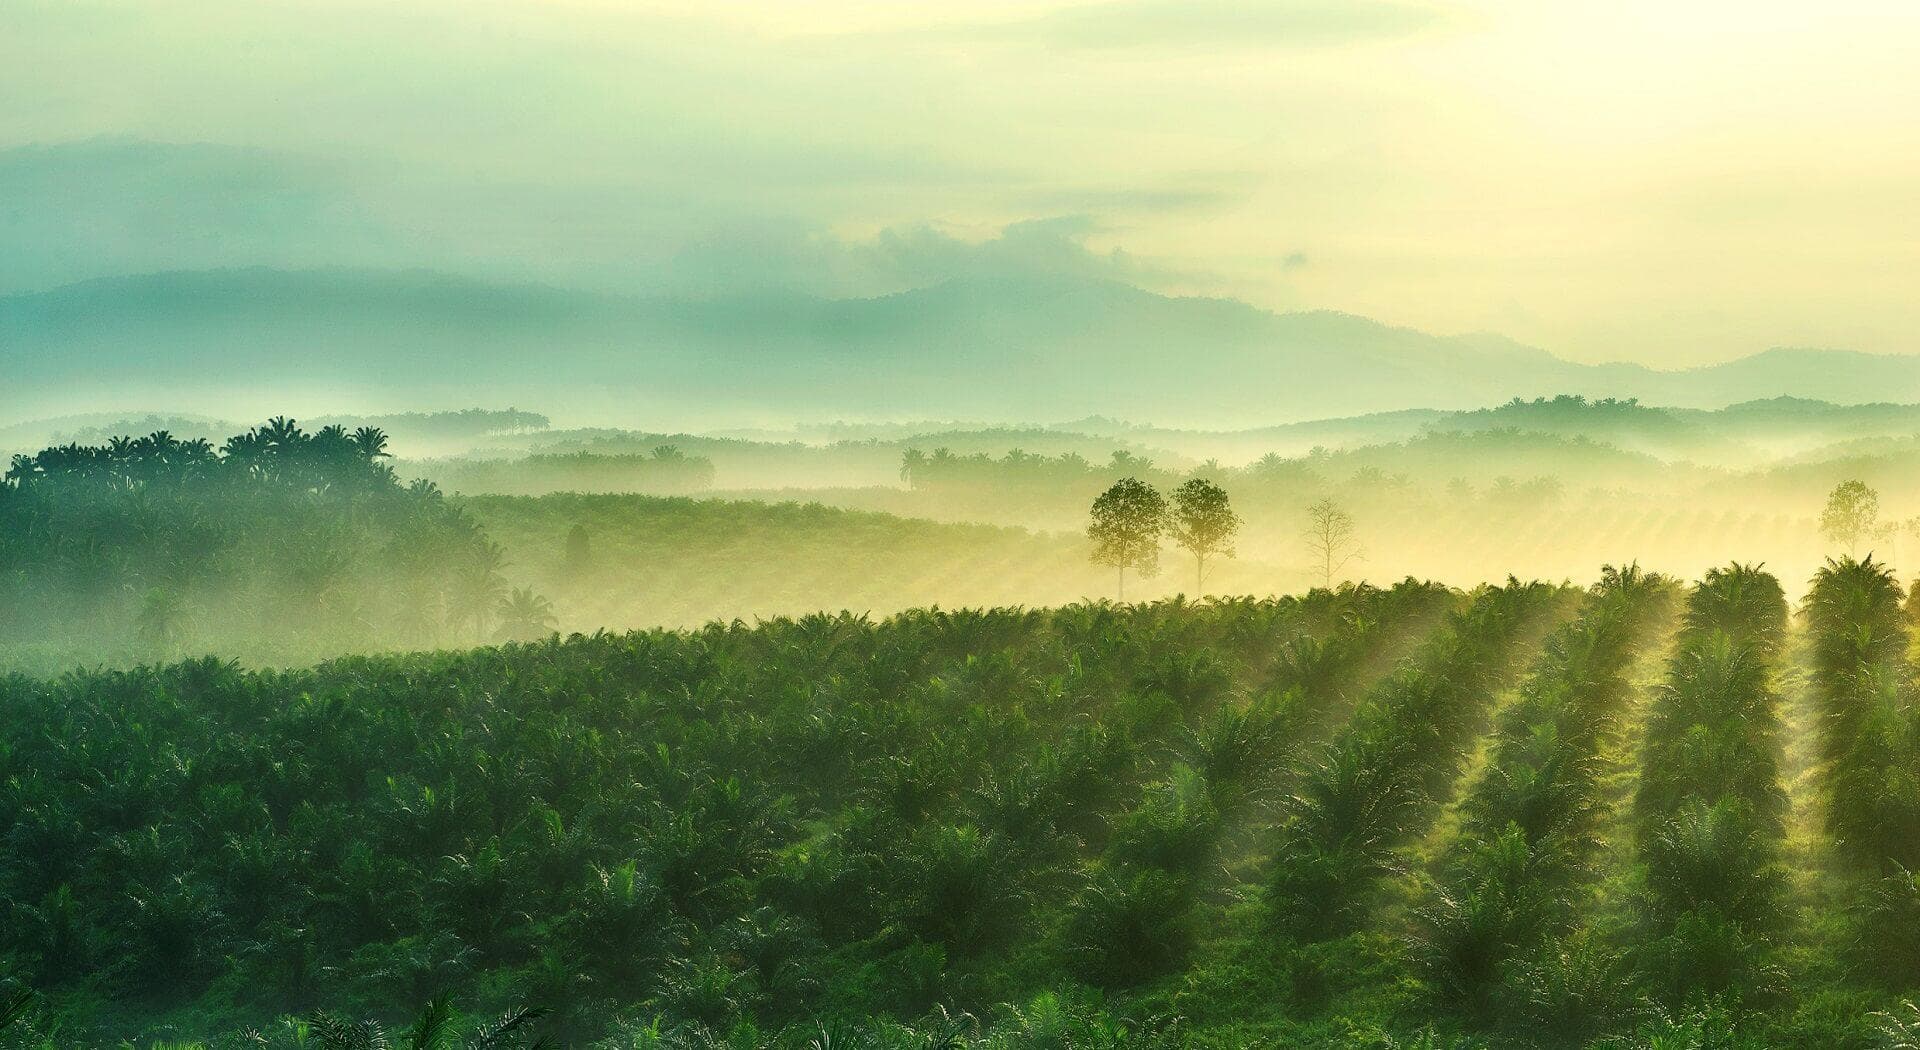 Sime darby plantation strengthens policy on suppliers who violate no deforestation commitments